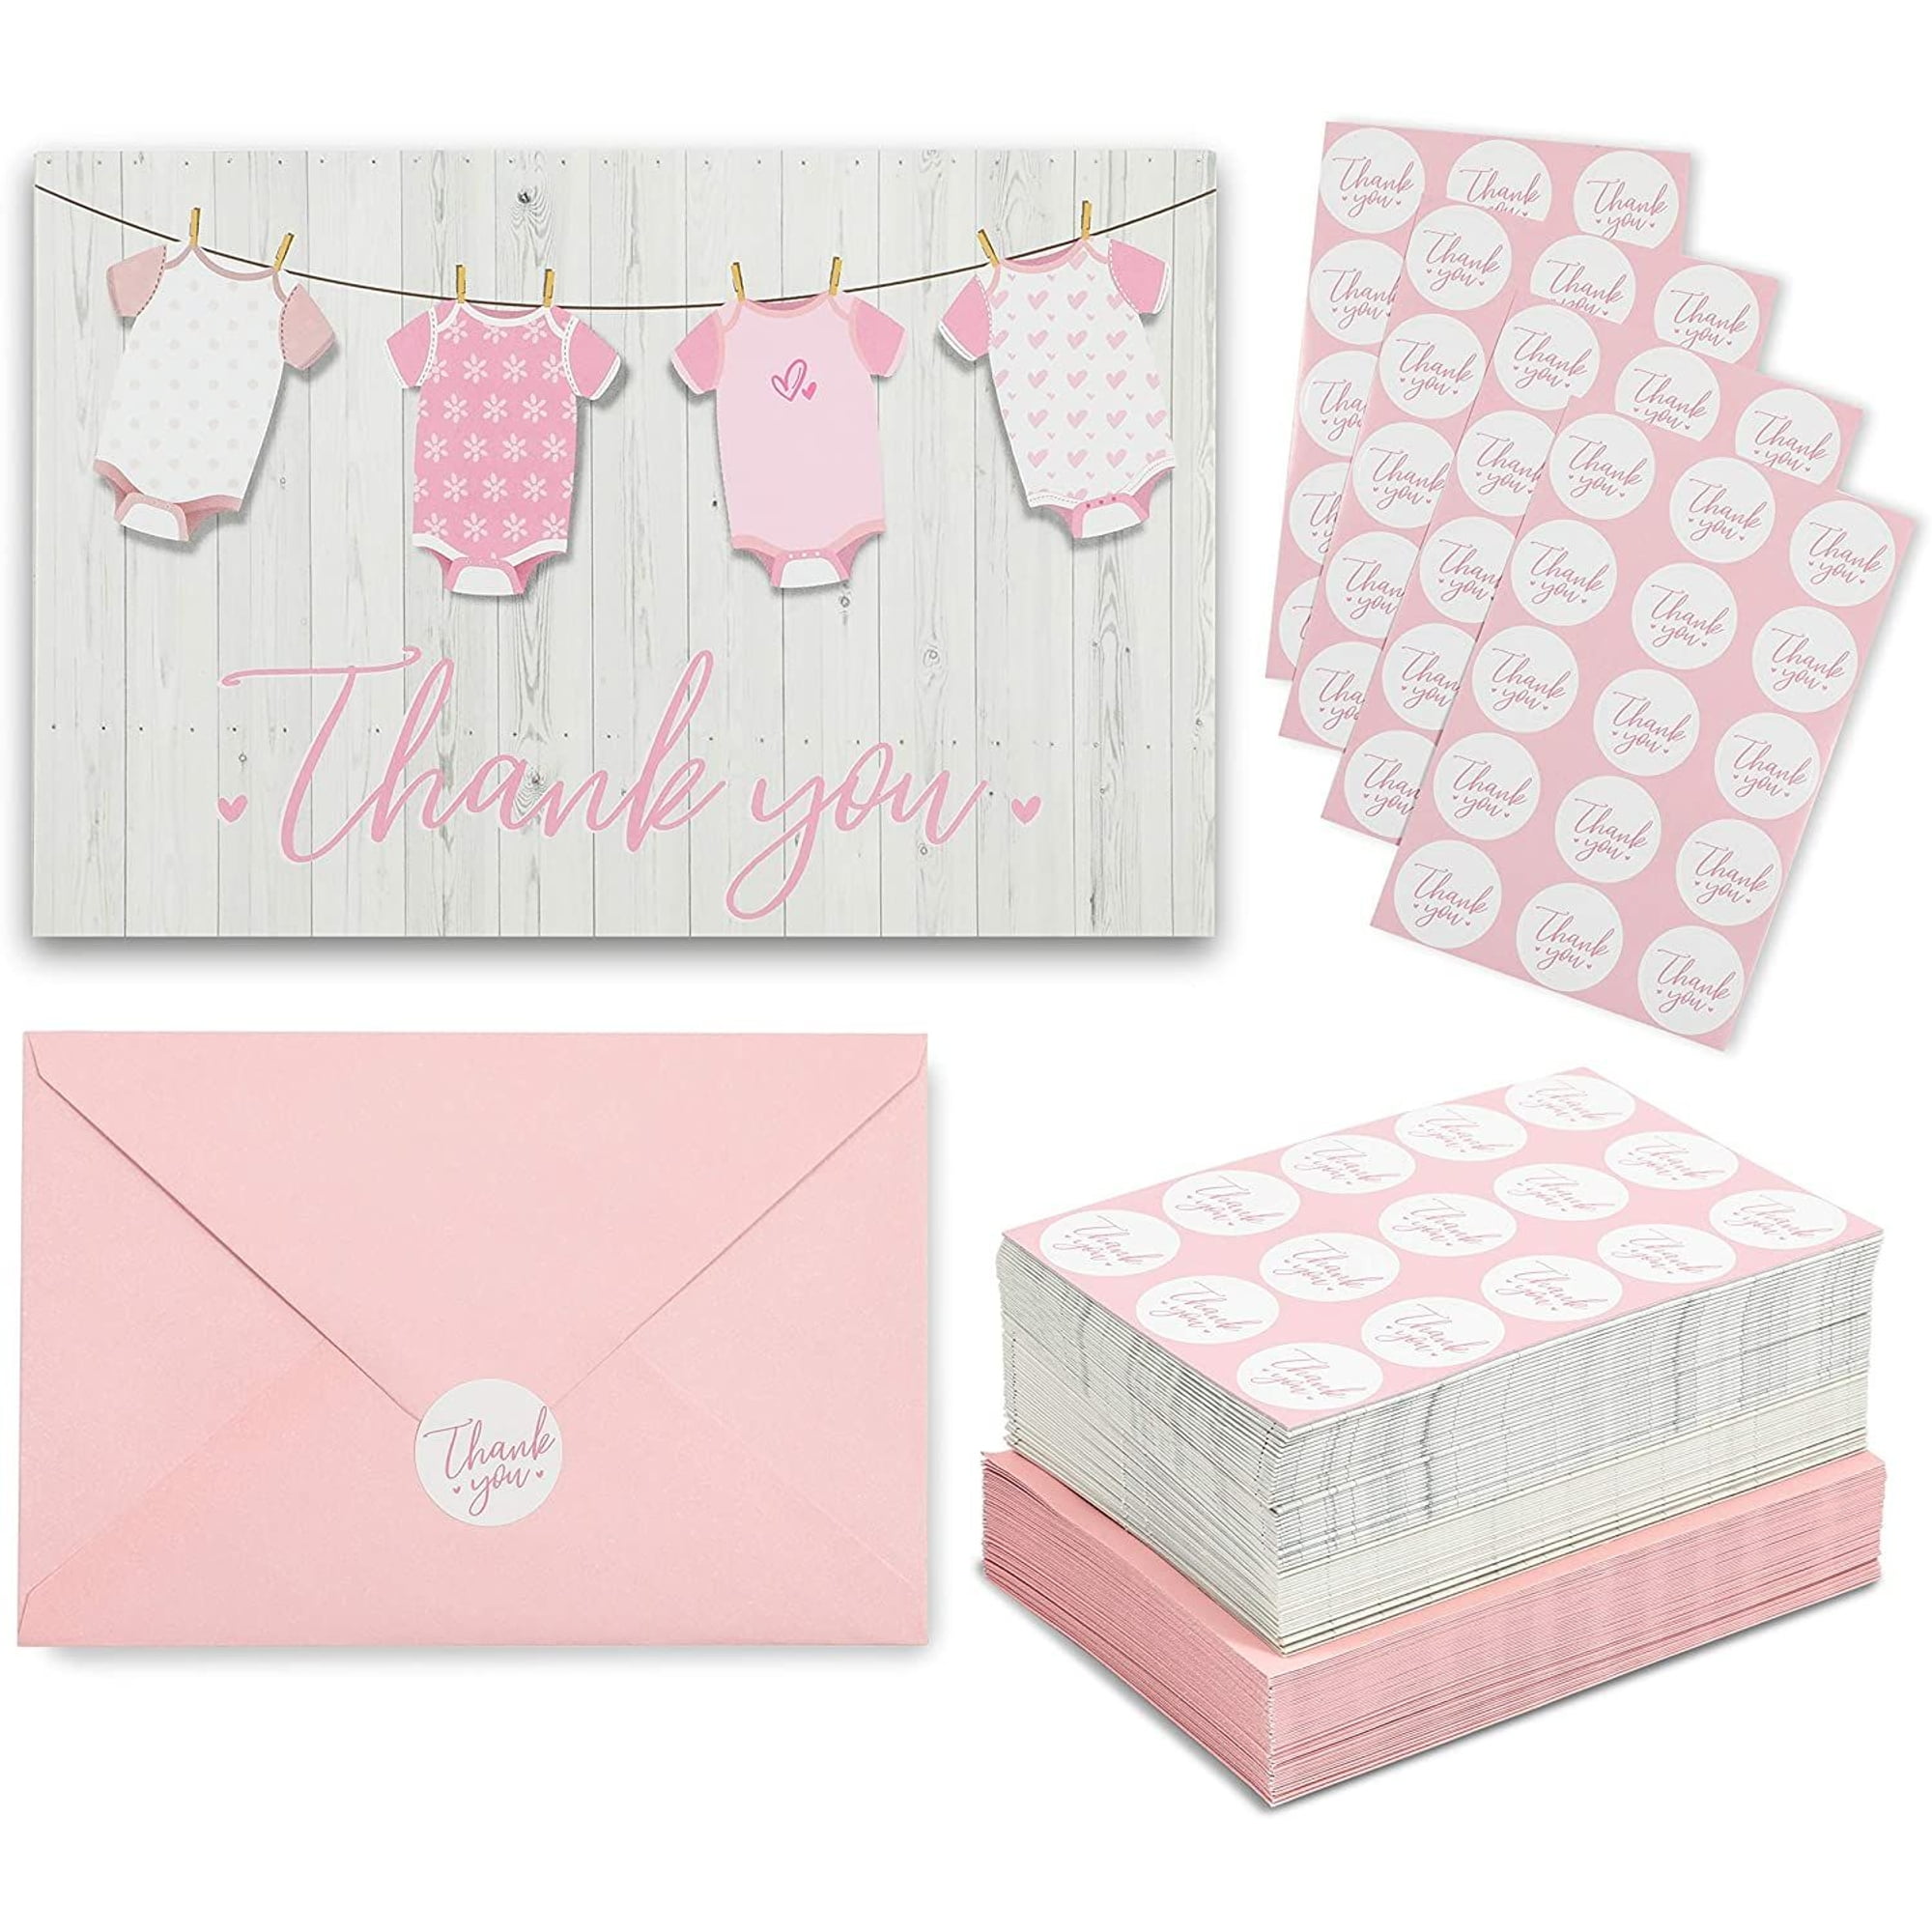 Kids Stationery Set Pink Gingham Girls Stationary Set Girls Flat Note Cards  Girls Thank You Cards Personalized Gift Idea for Girls 